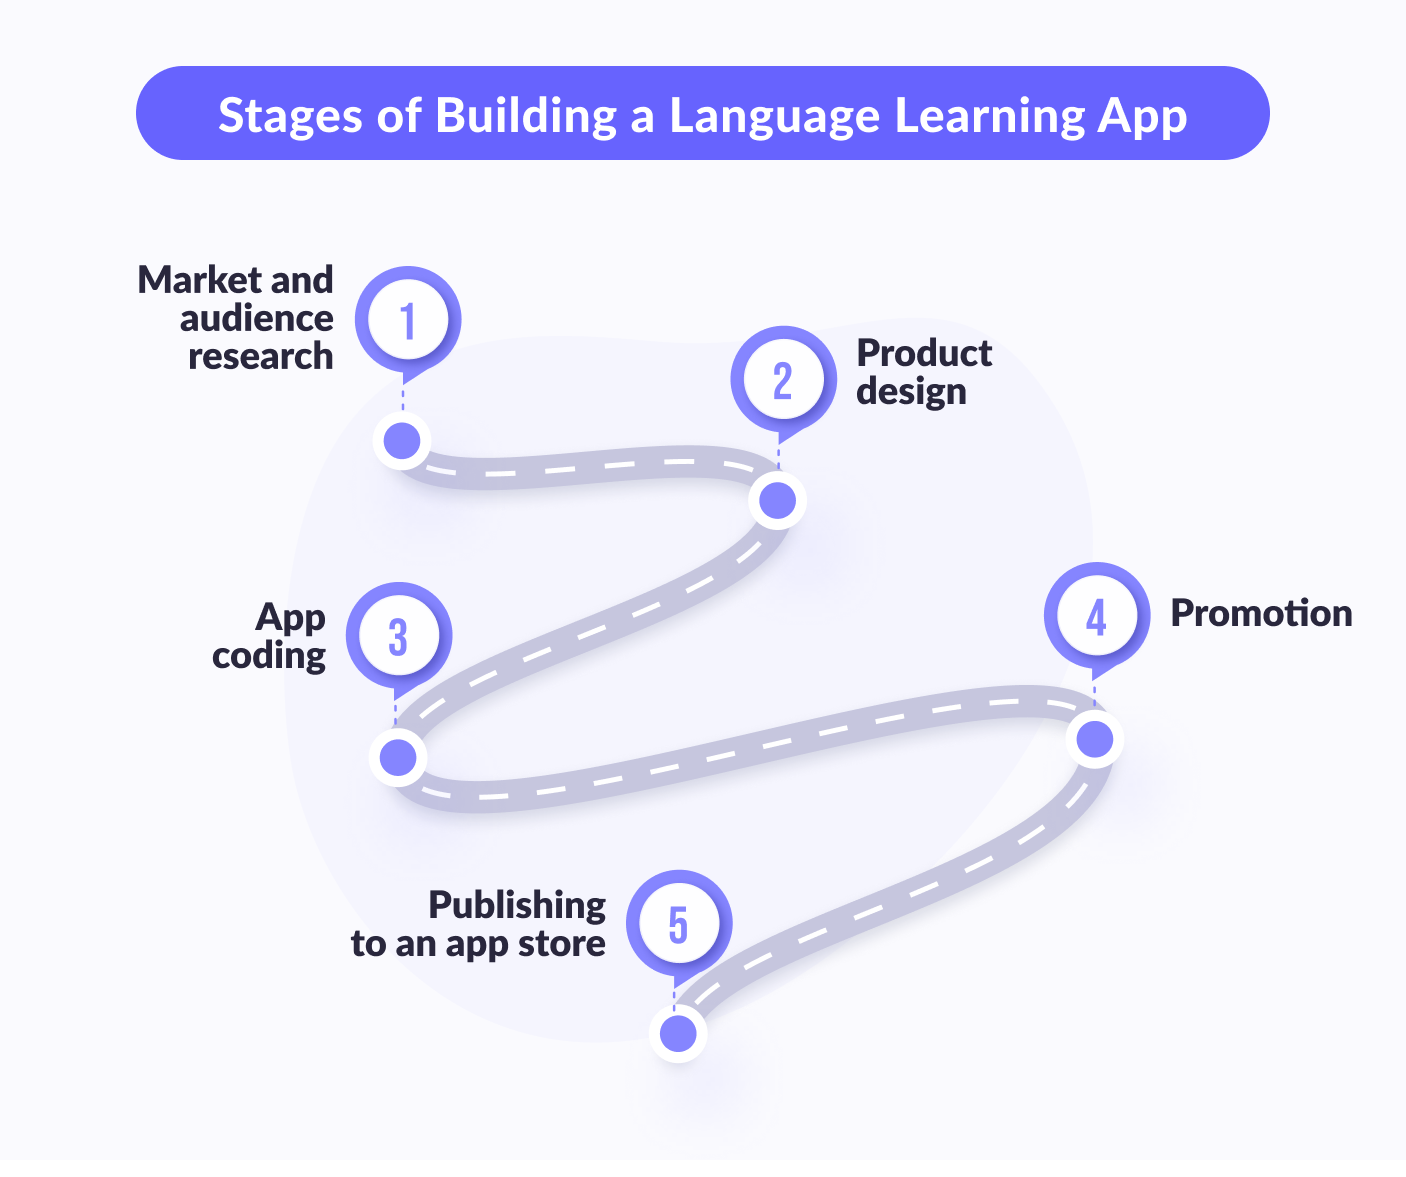 Stages of building a language learning app